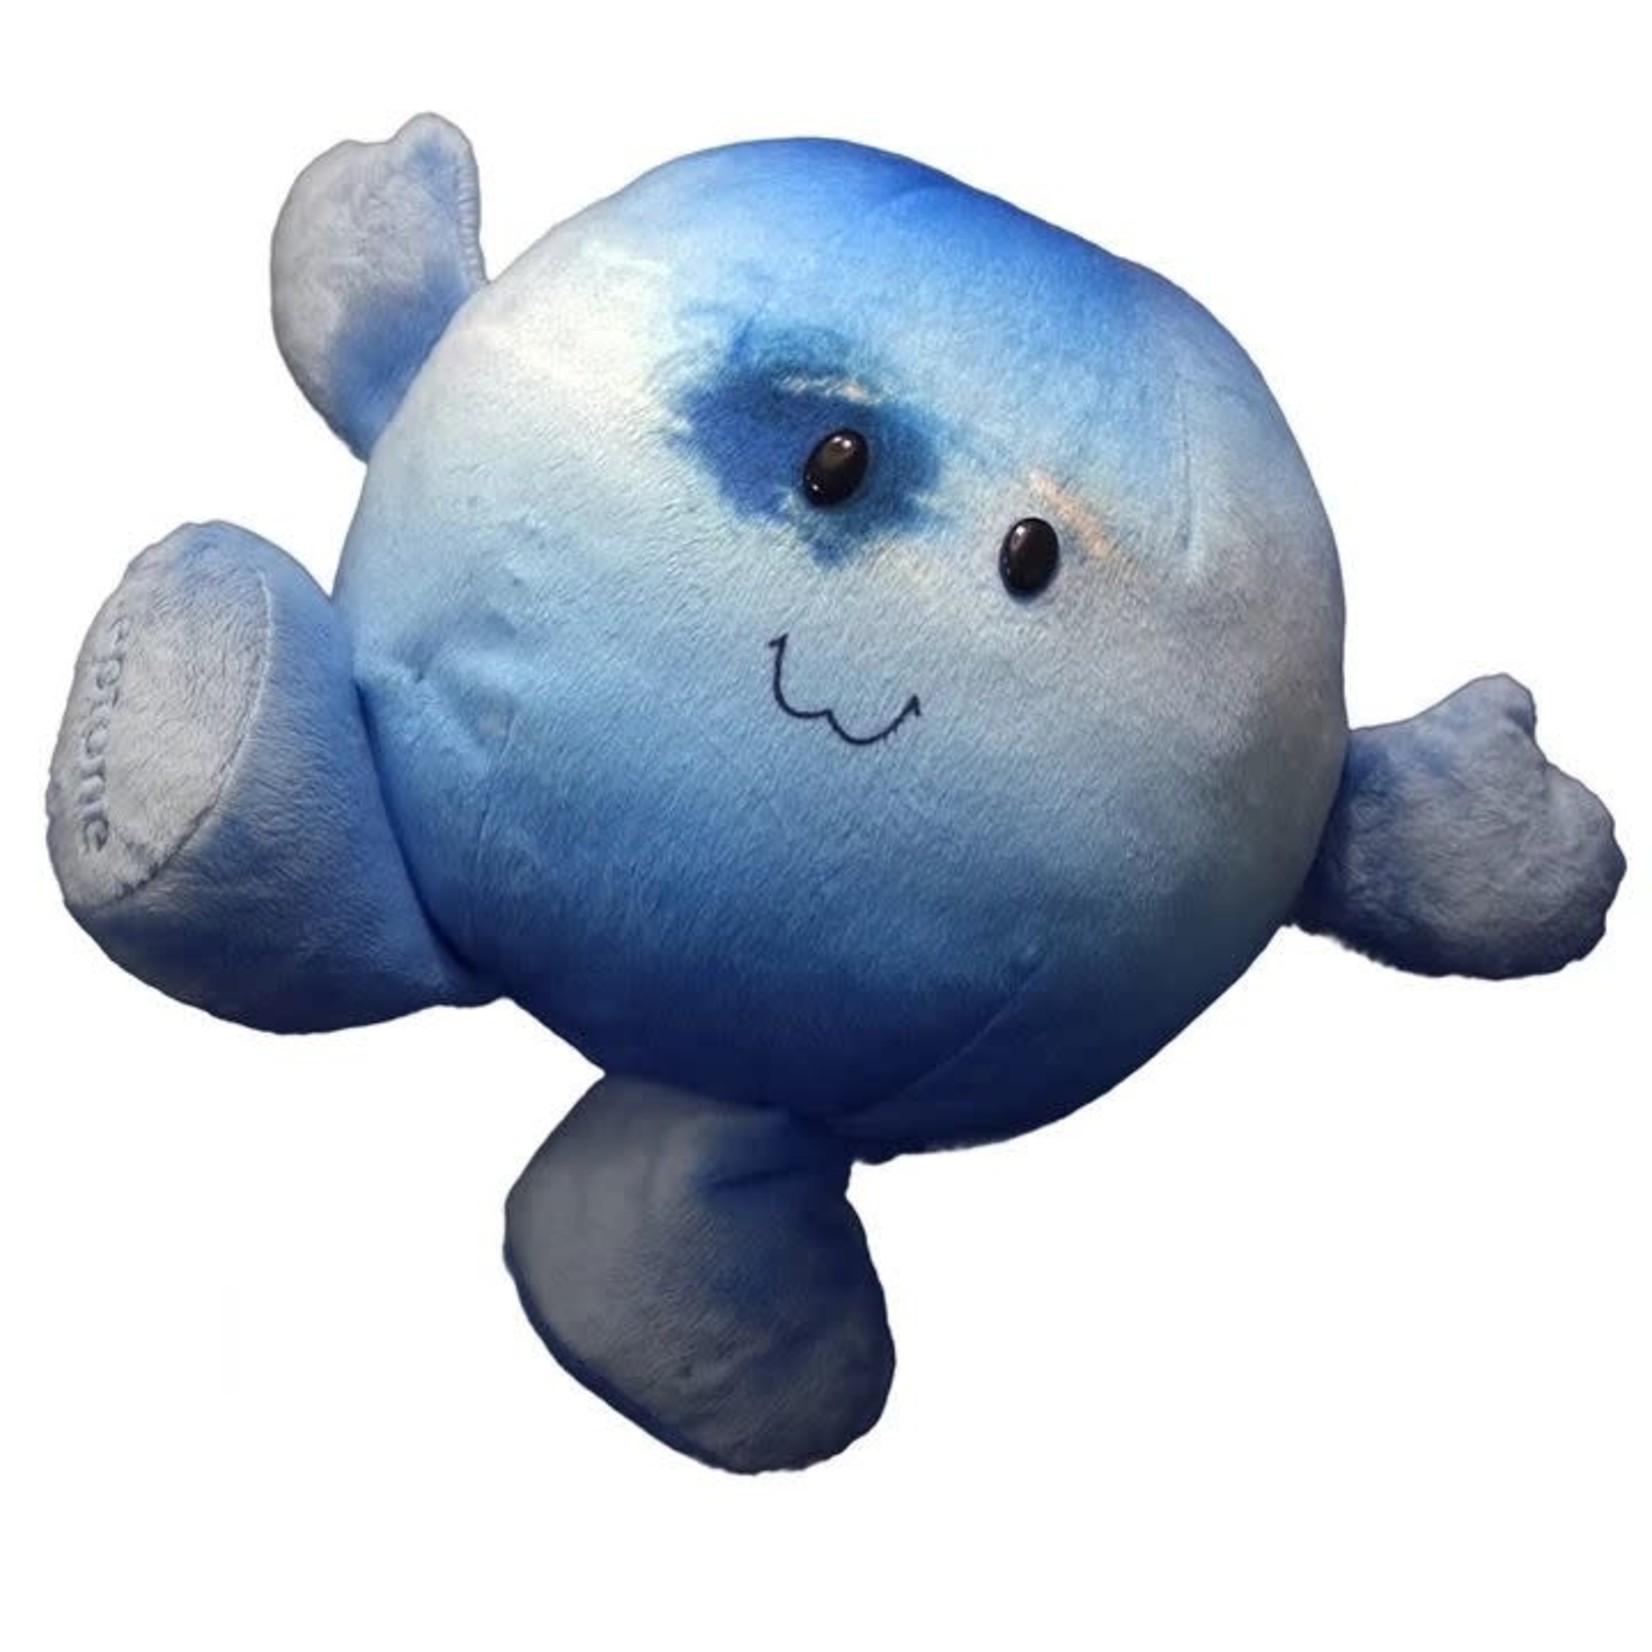 Aviation and Space Celestial Buddies™  Neptune pelucheuse